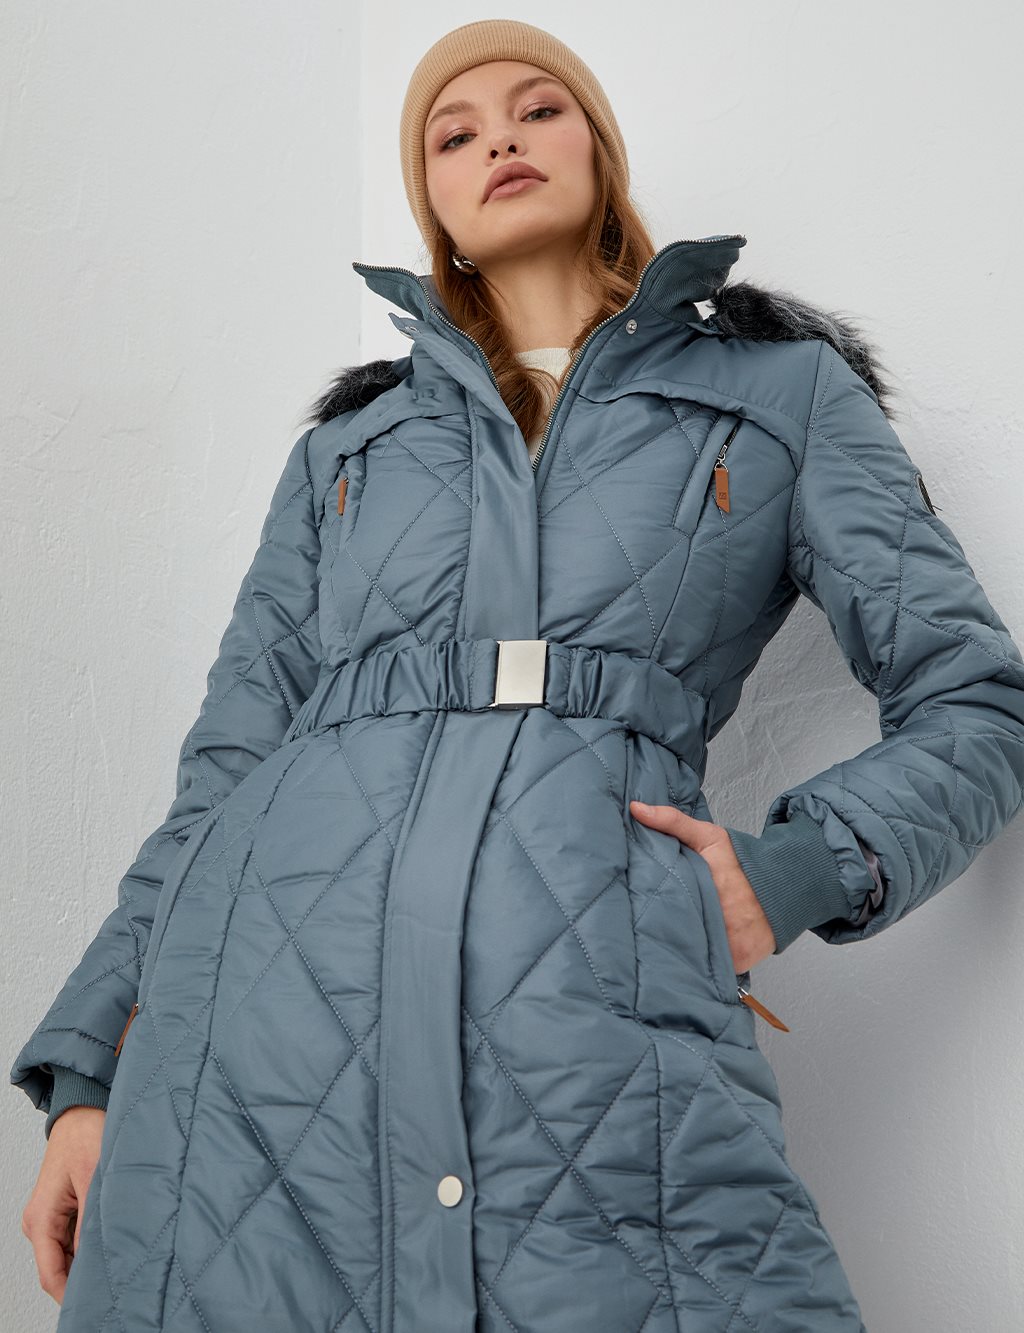 Diamond Patterned Quilted Inflatable Coat Teal